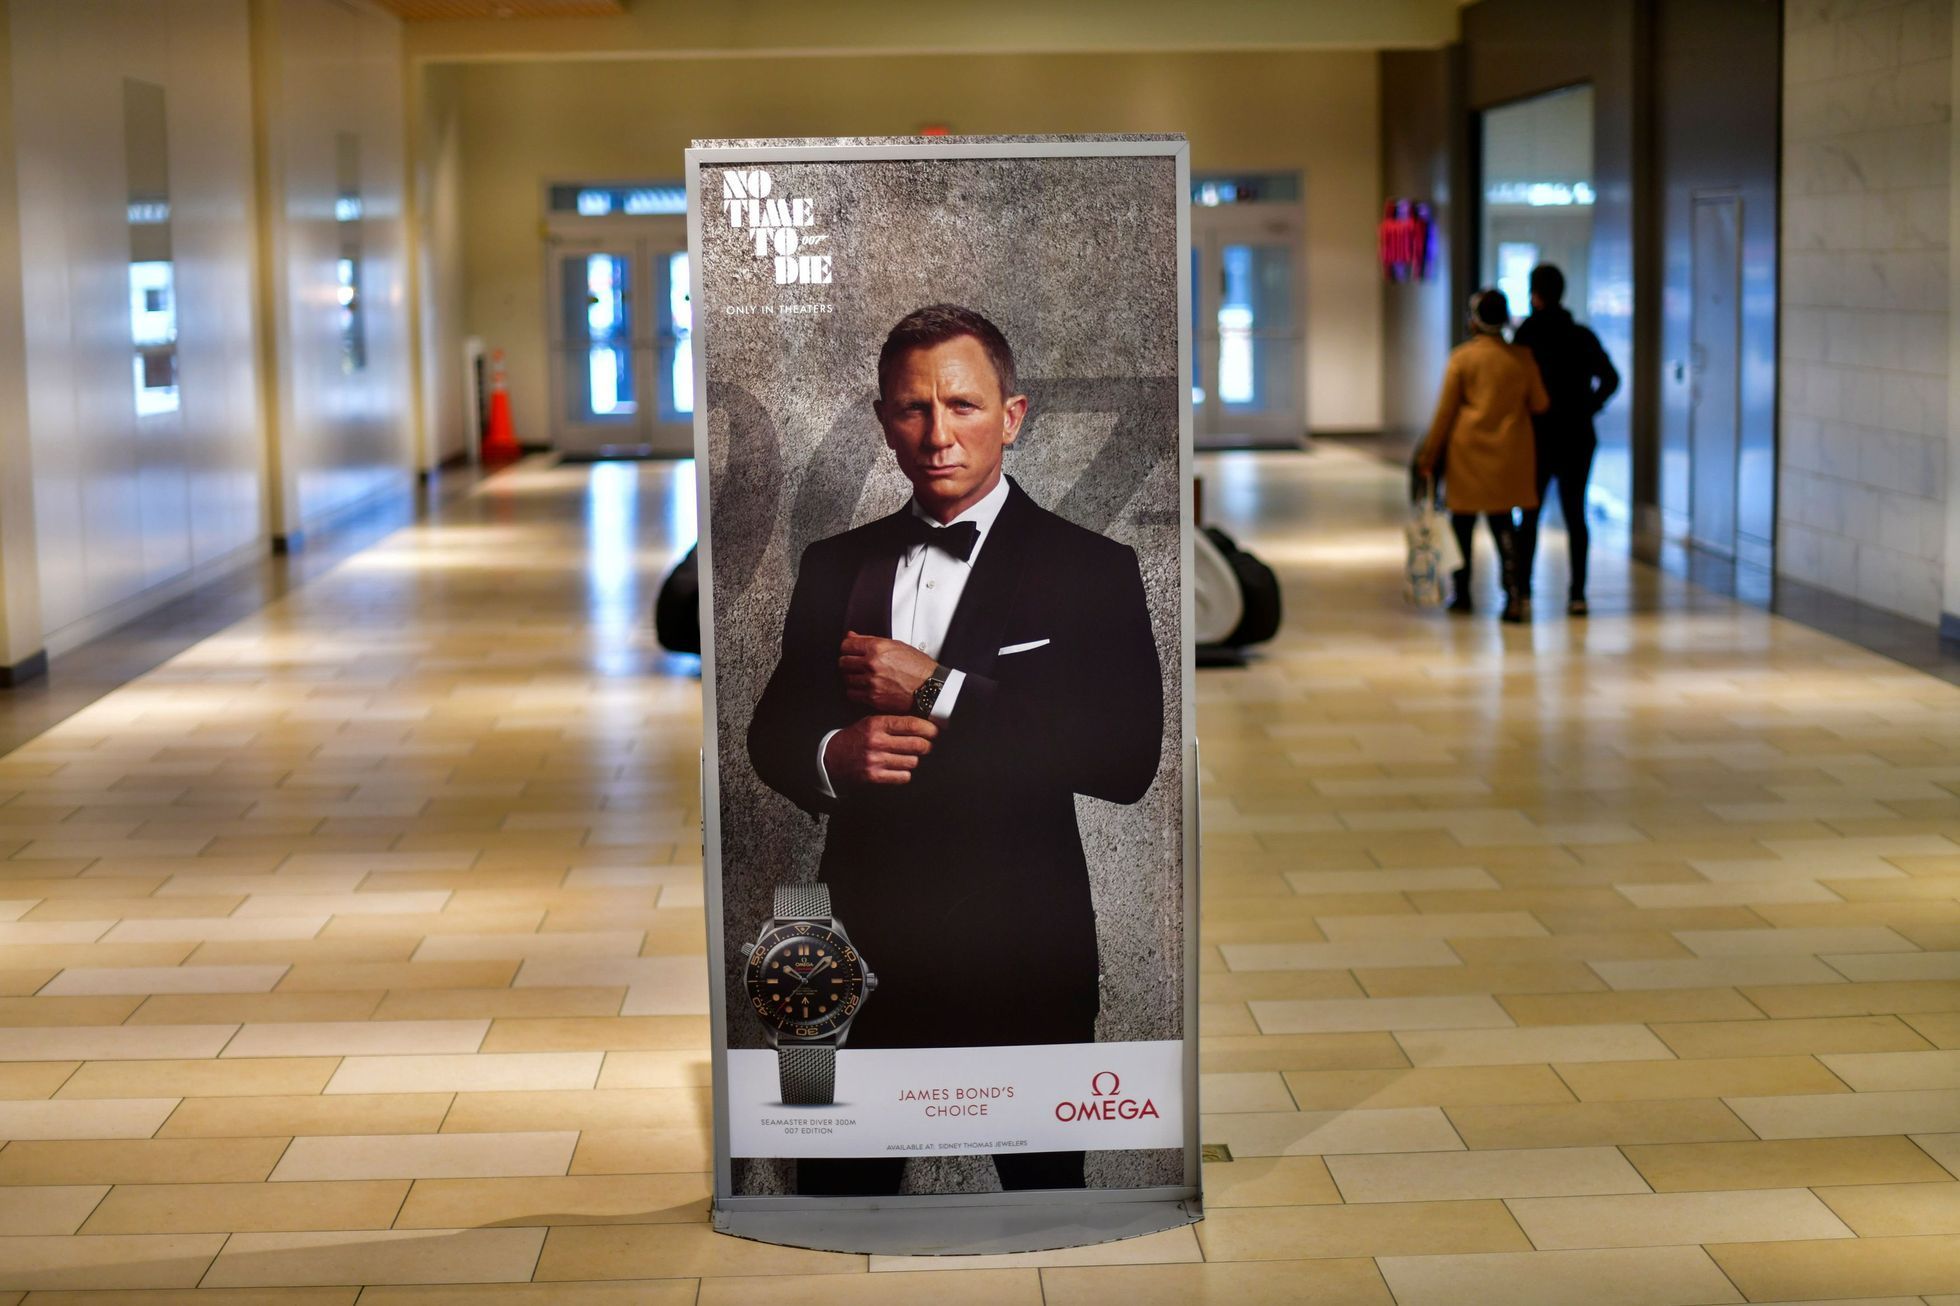 Shoppers walk past an advertisement for the upcoming James Bond film "NO TIME TO DIE" whose release has been delayed due to the coronavirus disease (COVID-19) pandemic at the Christiana Mall in Newark